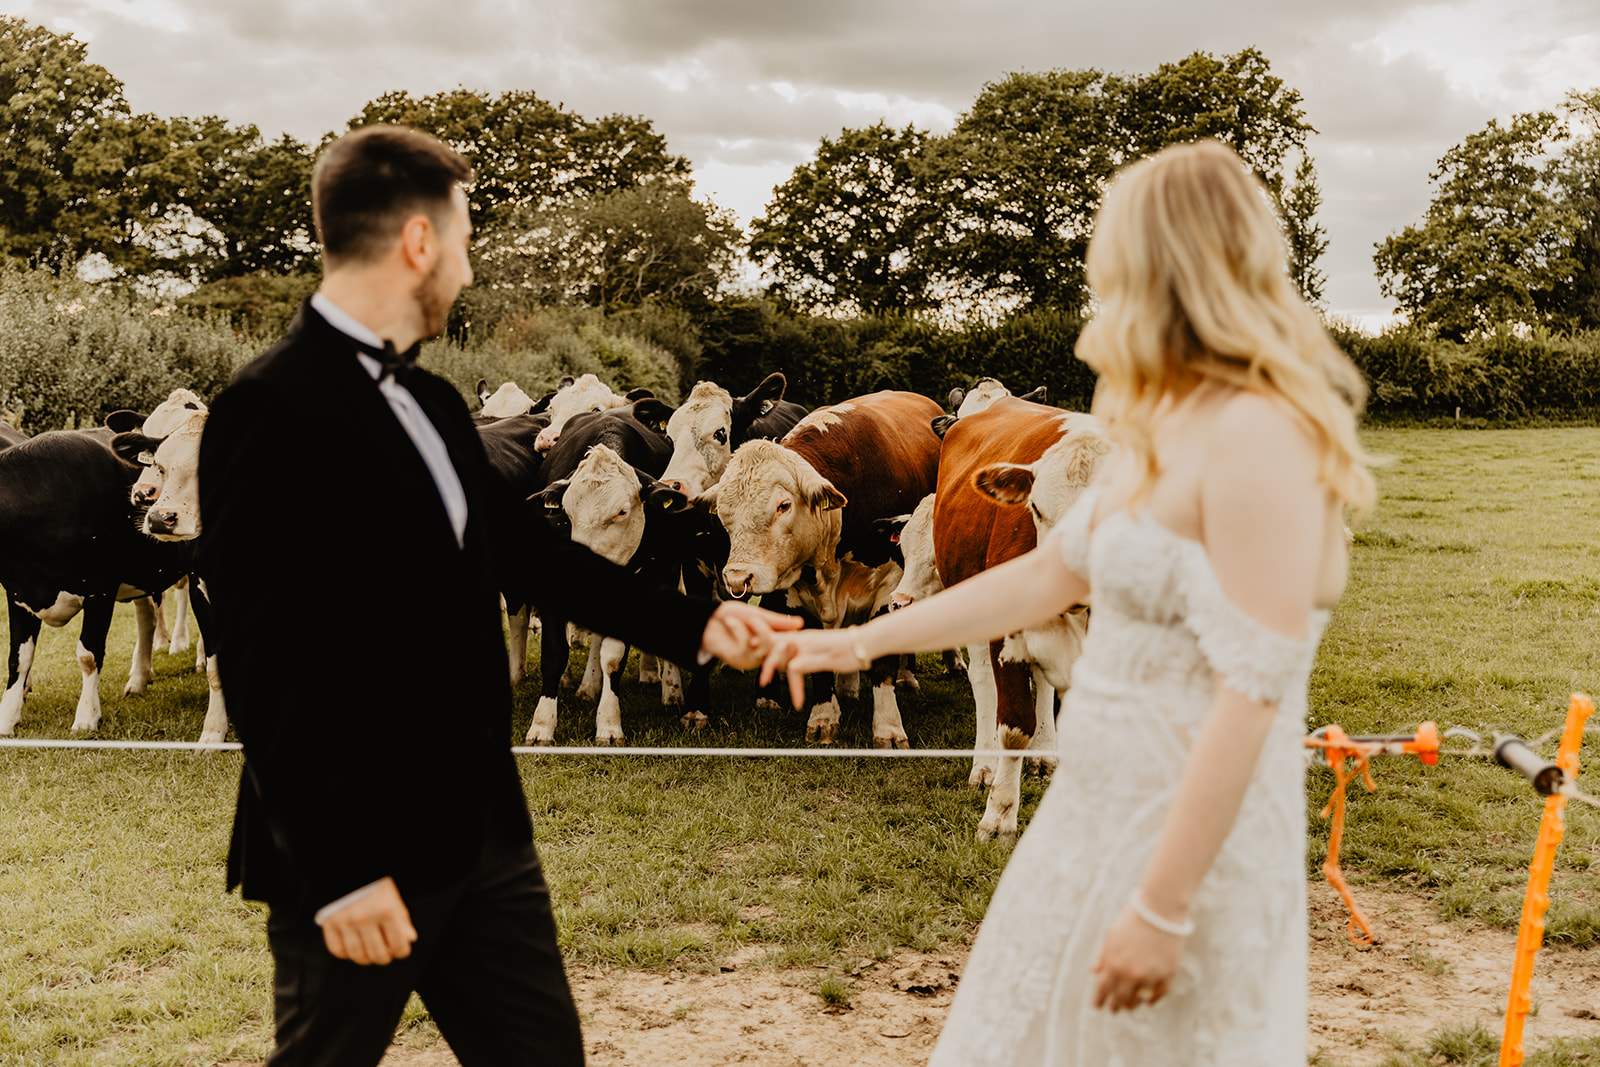 Bride and groom with cows at a Southlands barn wedding, Sussex. Photo by OliveJoy Photography.